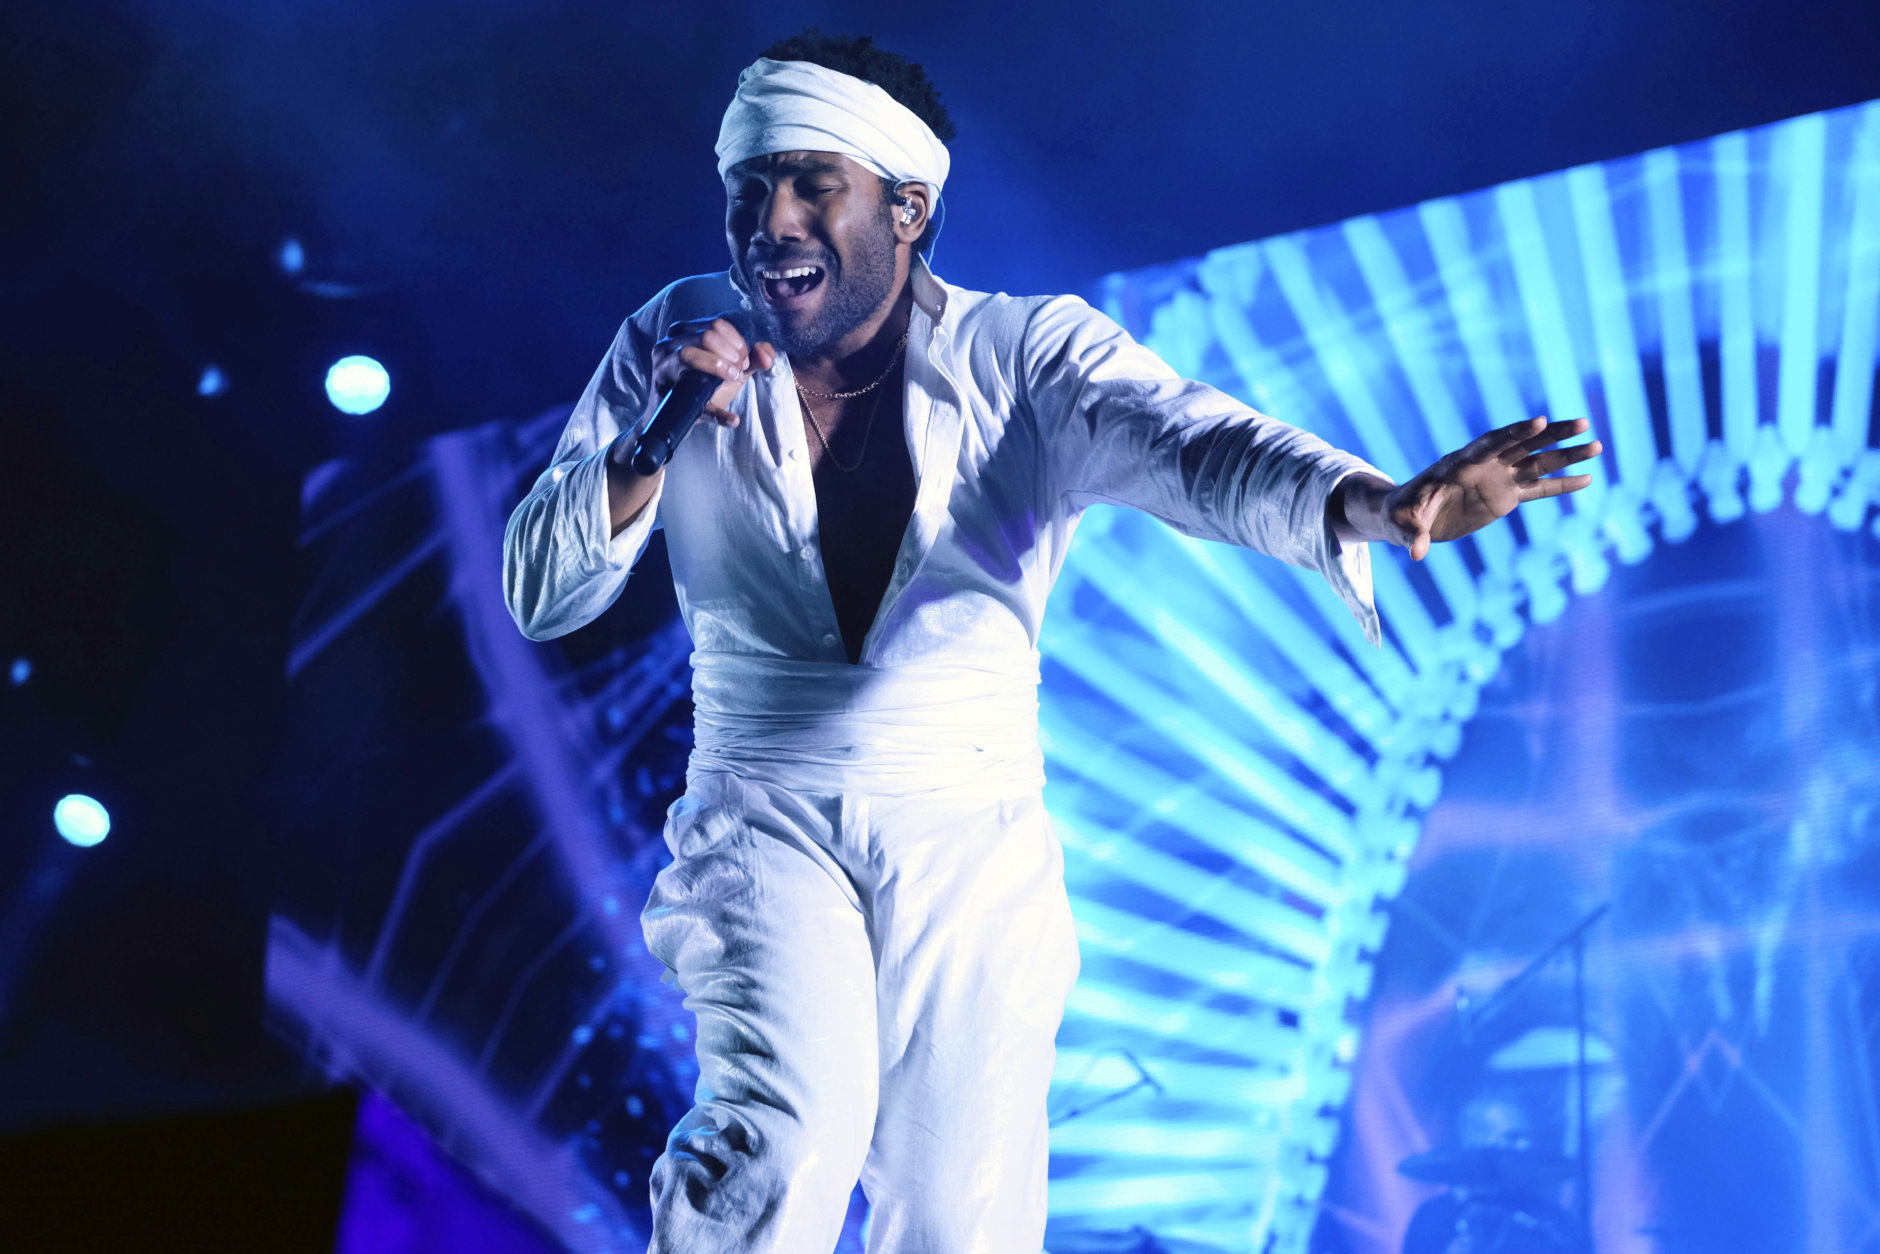 FILE - In this June 3, 2017, file photo, Donald Glover, who goes by the stage name Childish Gambino, performs at the Governors Ball Music Festival in New York. Glover's "Redbone" was named as one of the top songs of the year by the Associated Press. (Photo by Charles Sykes/Invision/AP, File)